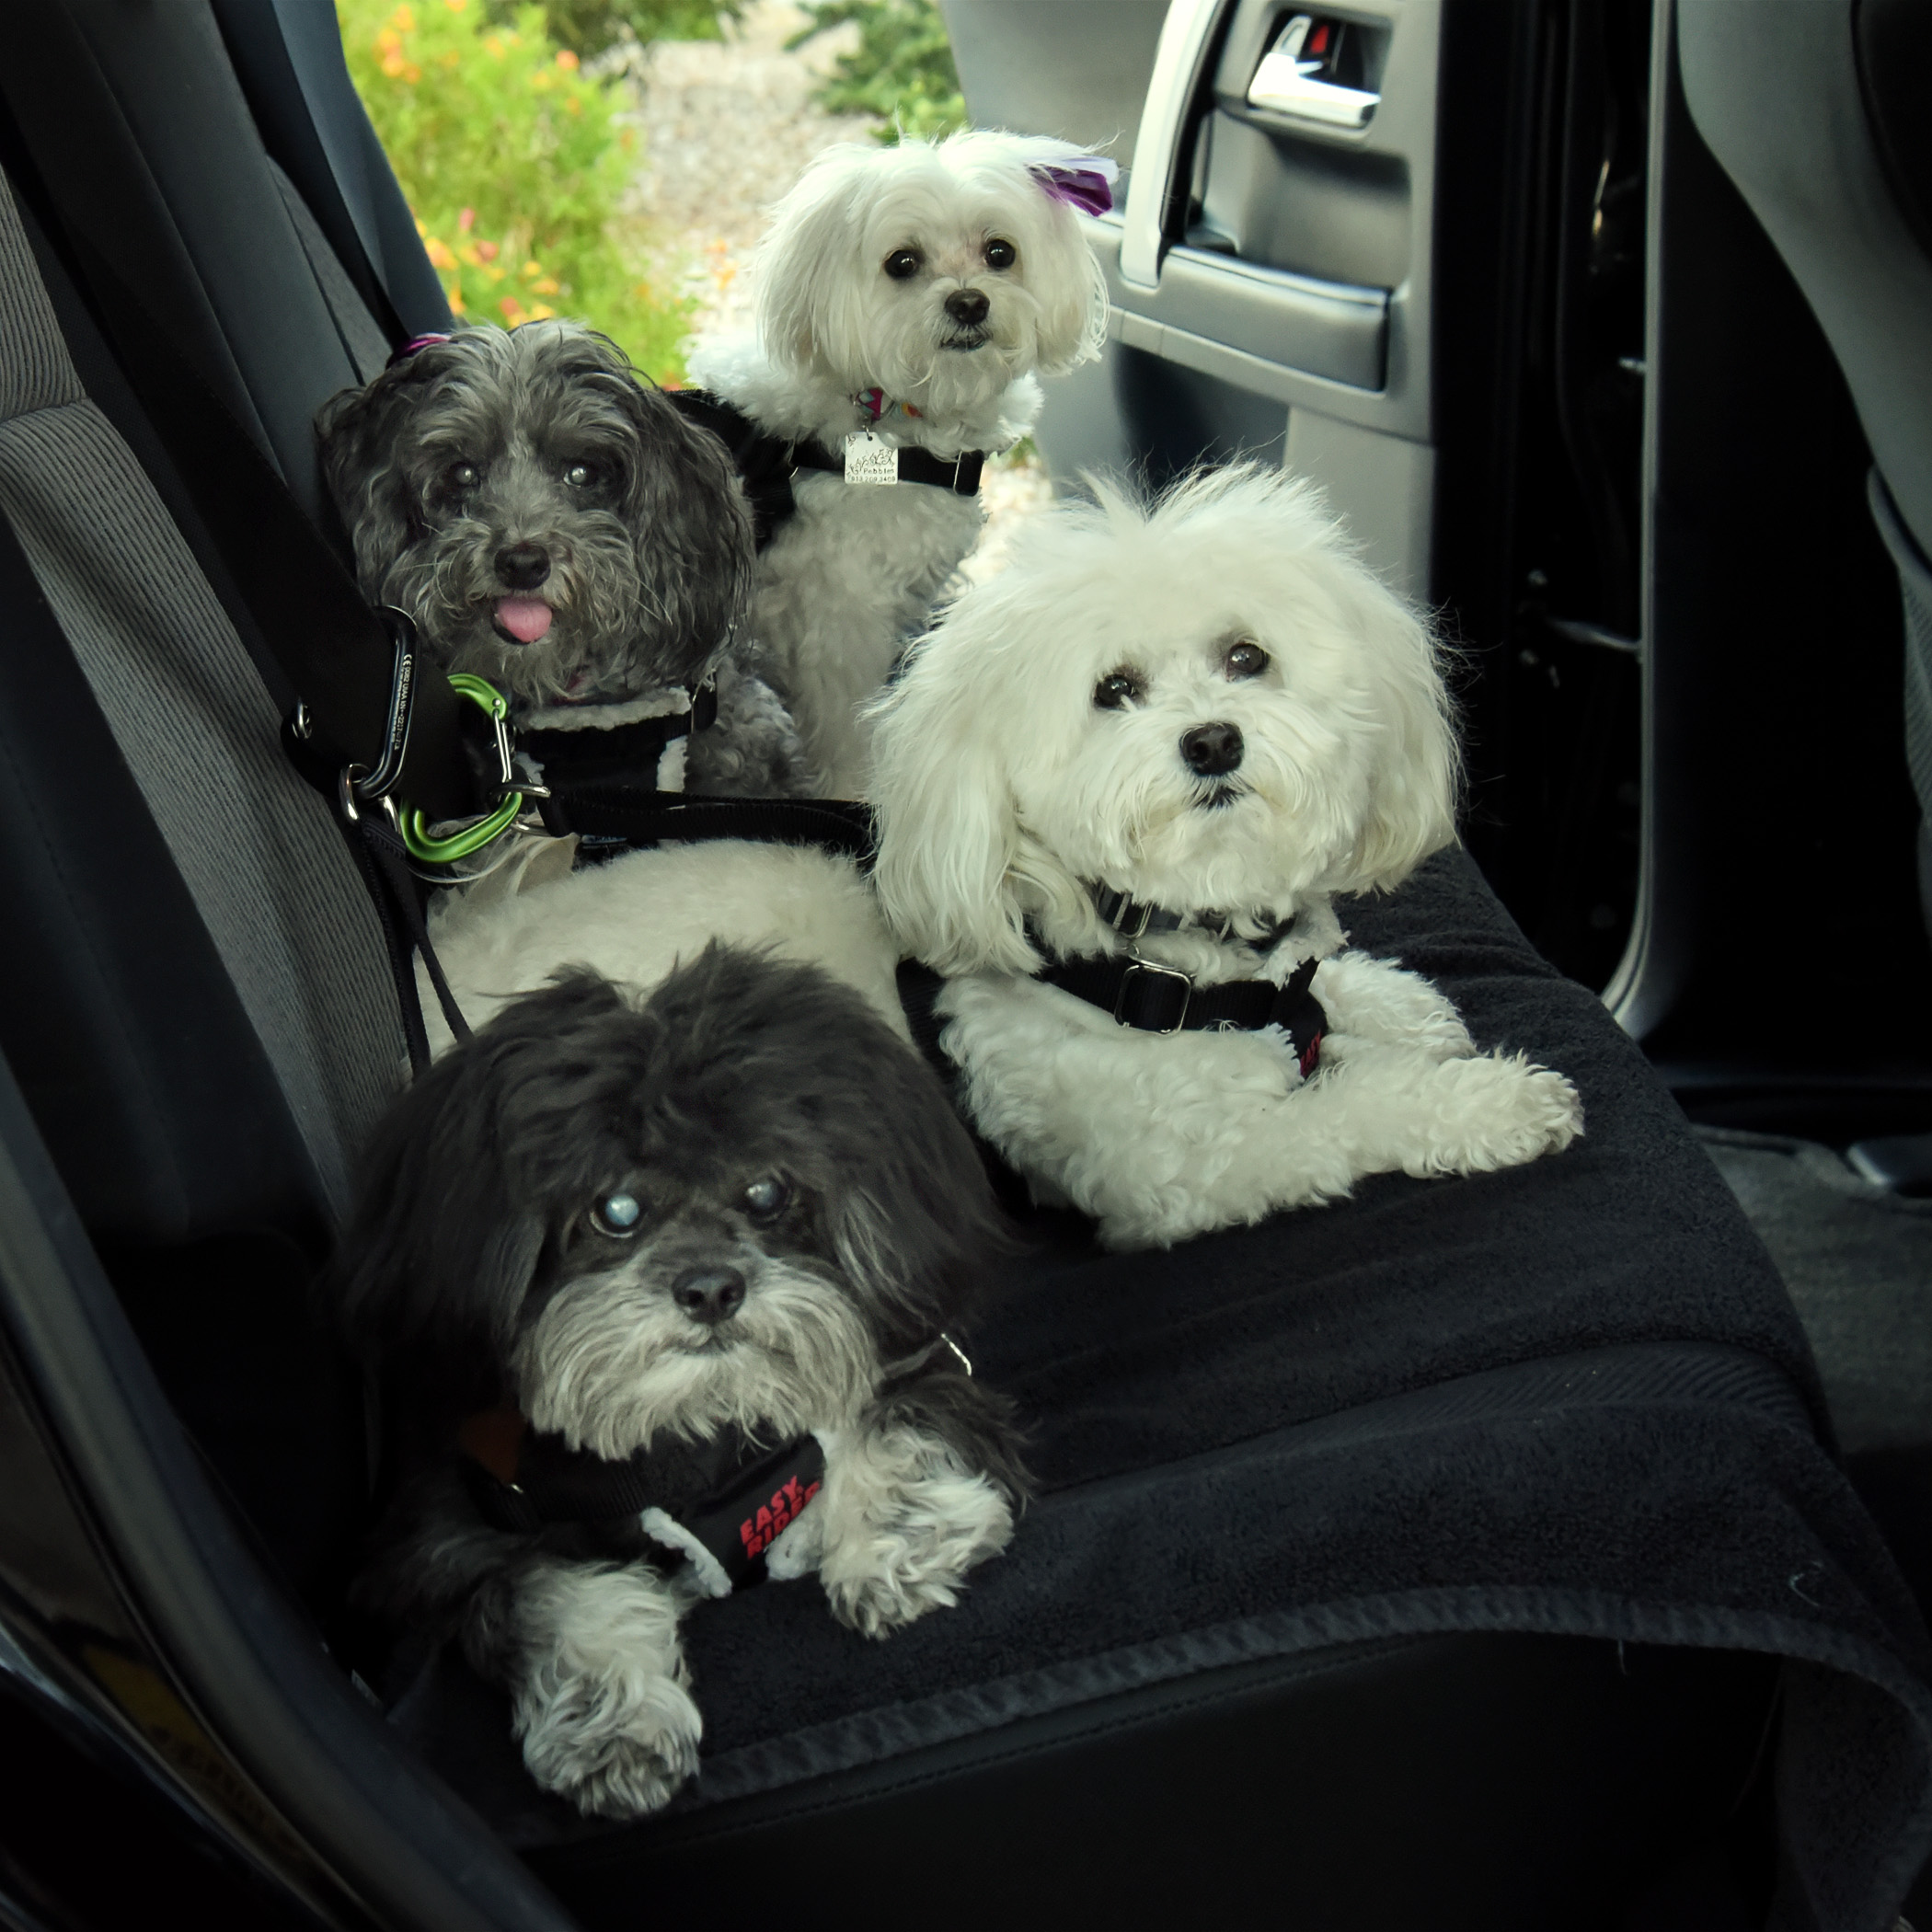  On the road, again, Mom?!? You &amp; Dad can drive. We’re beat…wake us when we get there! 